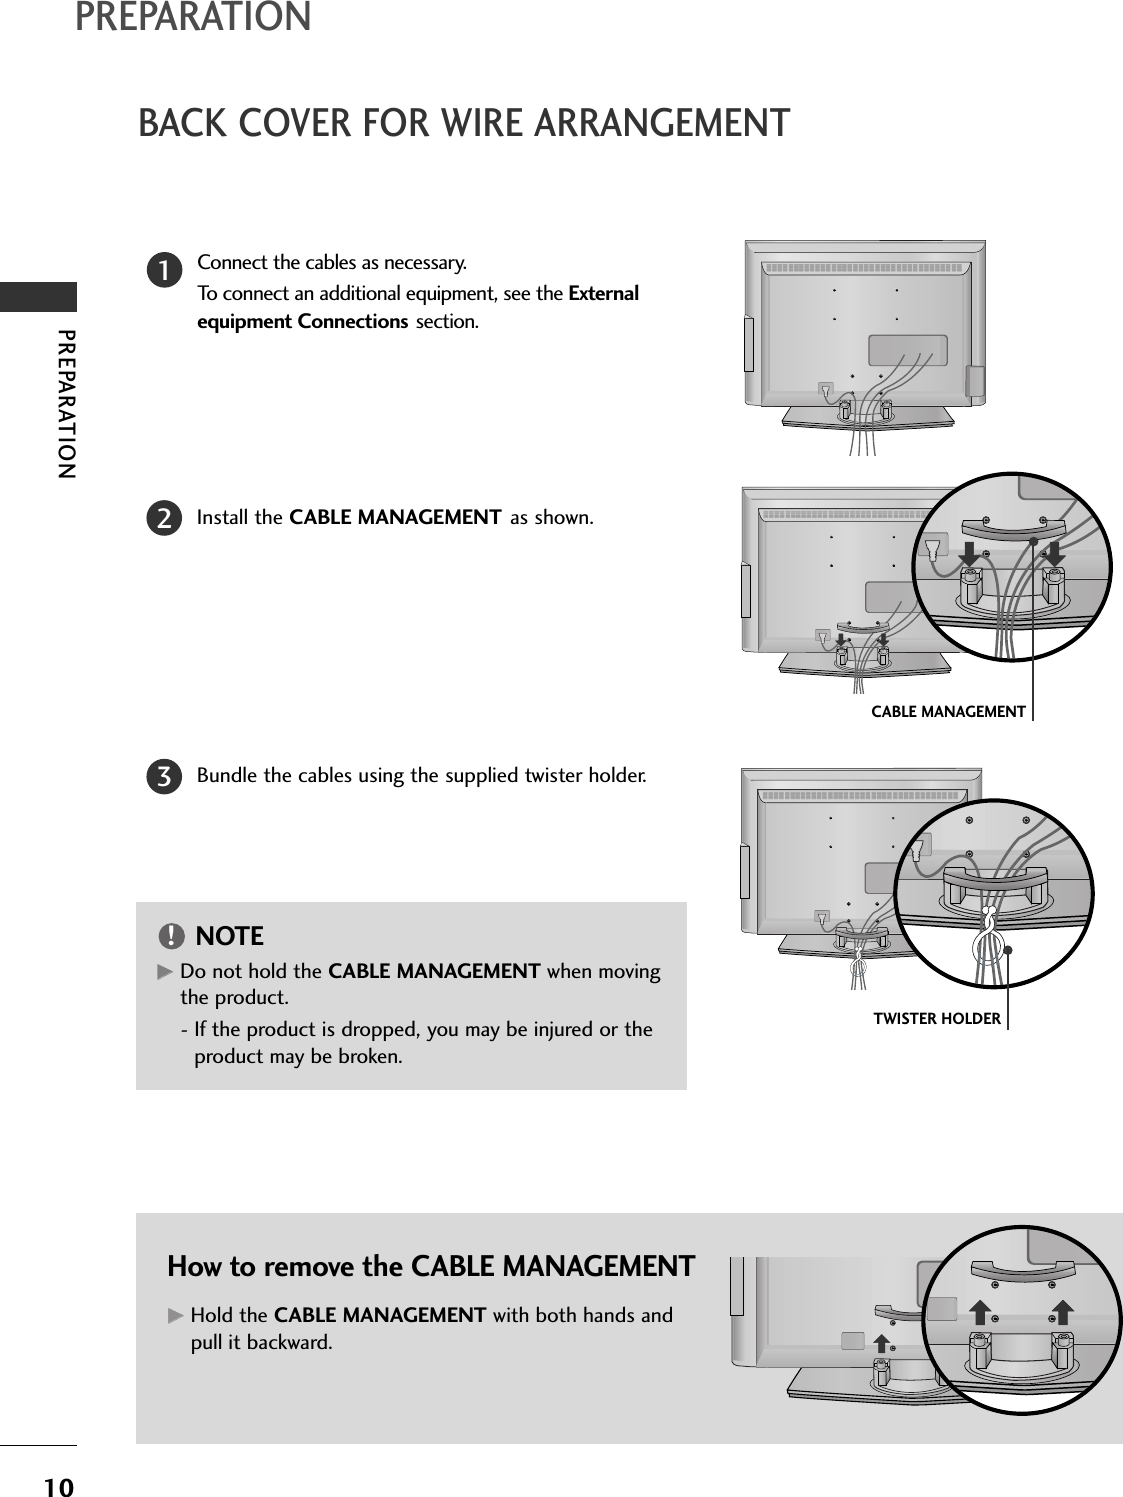 PREPARATION10BACK COVER FOR WIRE ARRANGEMENTPREPARATIONConnect the cables as necessary.To connect an additional equipment, see the External equipment Connections section.Install the CABLE MANAGEMENT as shown.How to remove the CABLE MANAGEMENTGGHold the CABLE MANAGEMENT with both hands andpull it backward.CABLE MANAGEMENTTWISTER HOLDERGGDo not hold the CABLE MANAGEMENT when movingthe product.- If the product is dropped, you may be injured or theproduct may be broken.NOTE!12Bundle the cables using the supplied twister holder.3